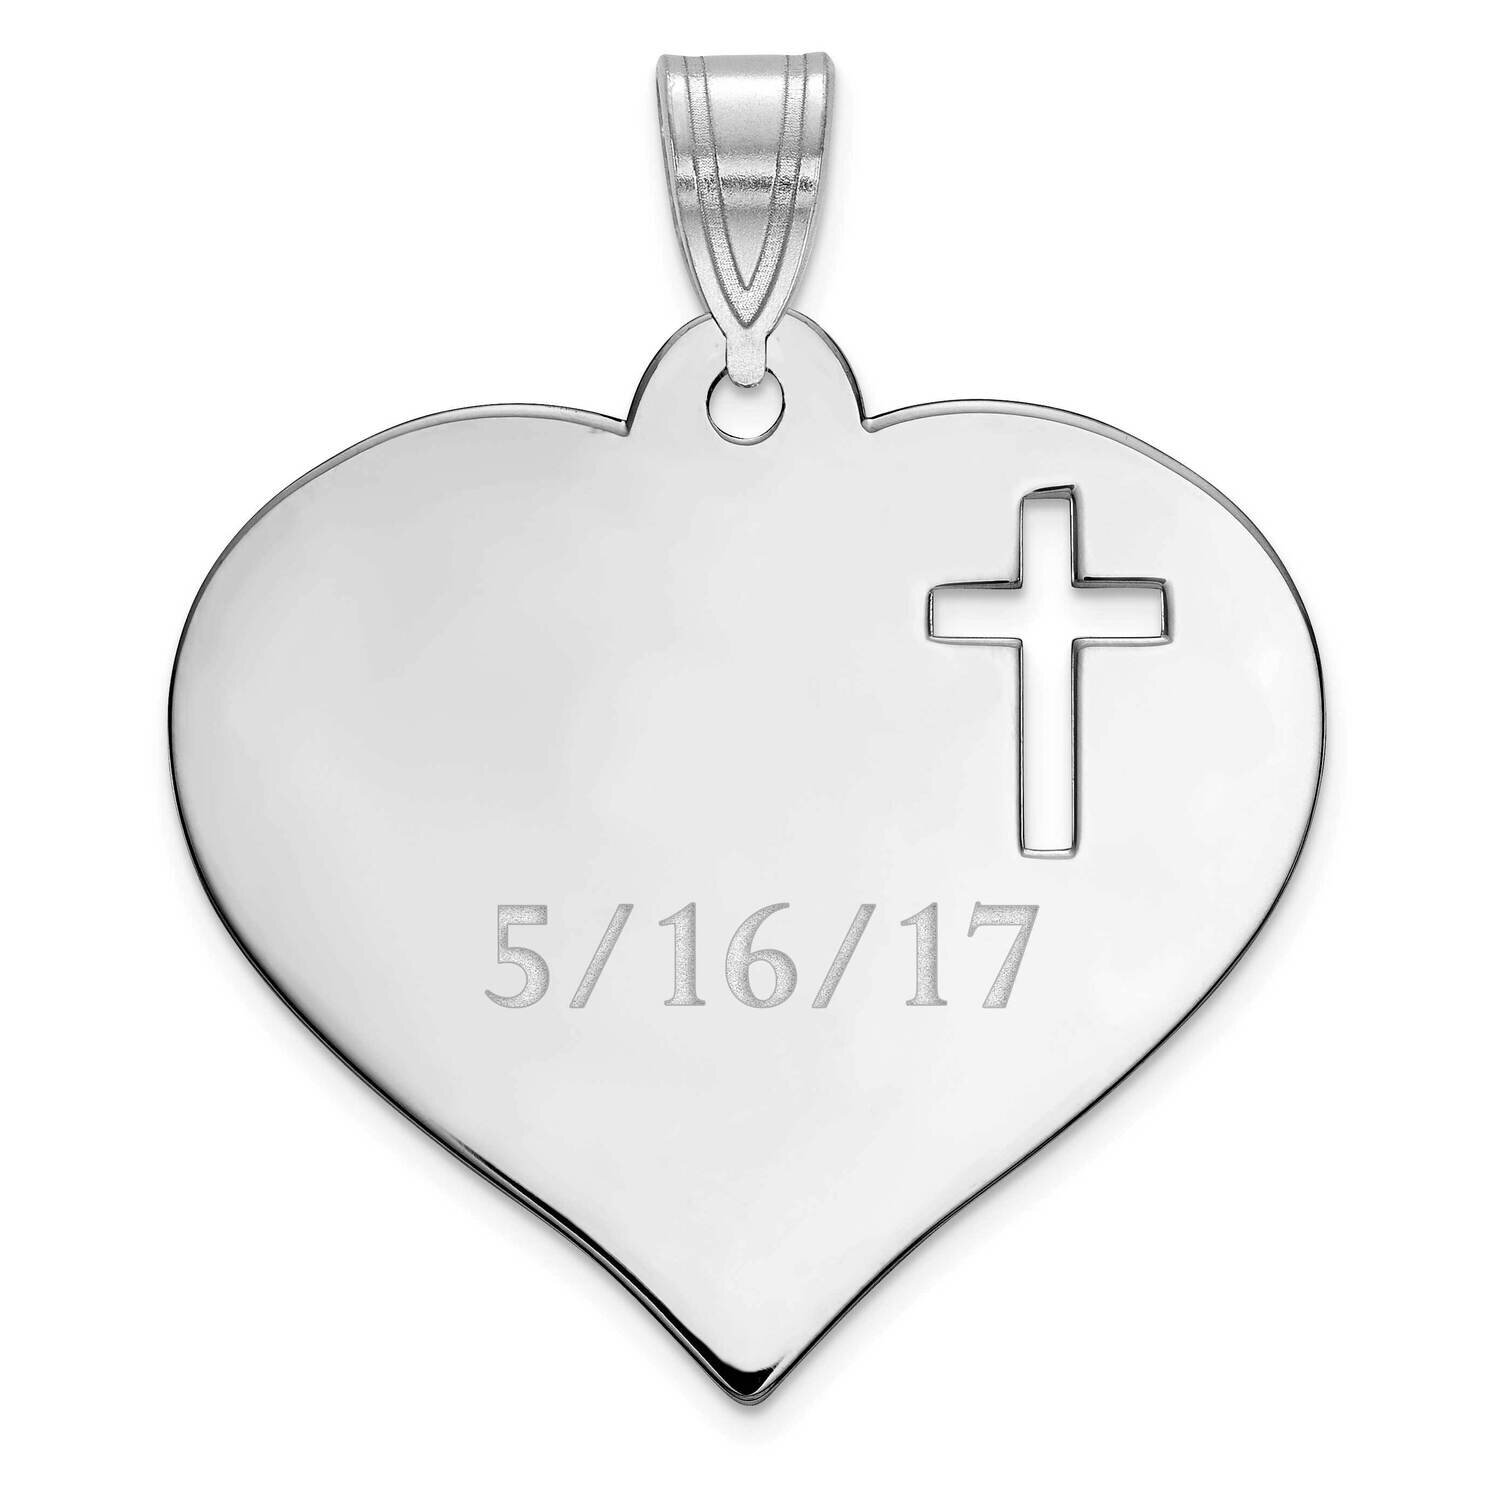 Personalized Heart with Cut Out Cross Pendant 10k White Gold 10XNA787W